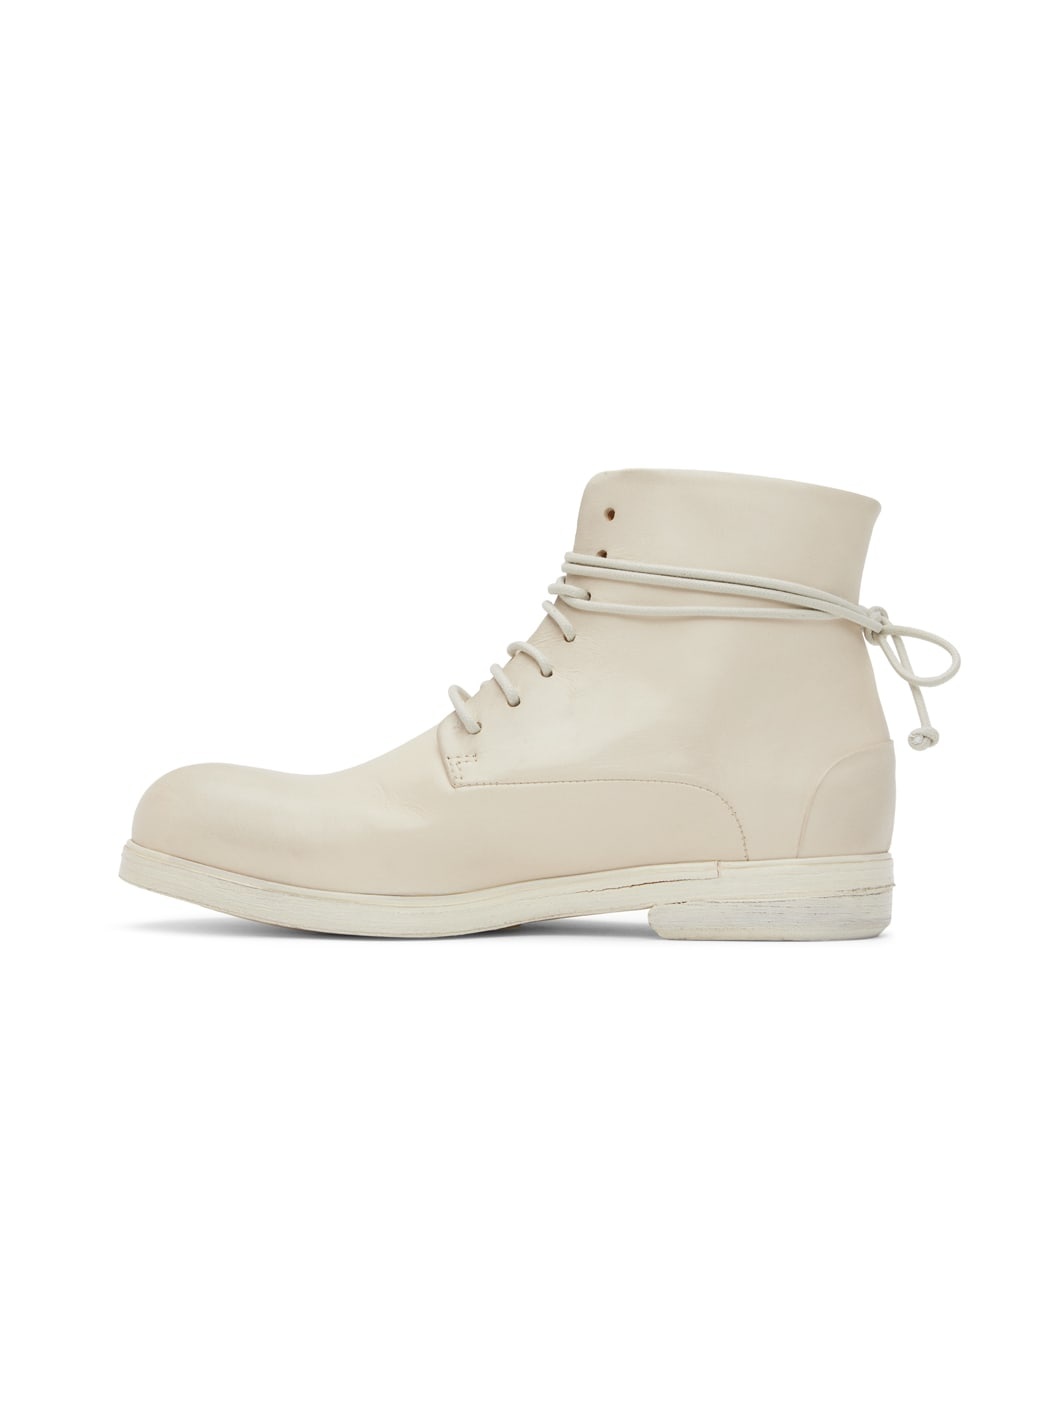 Off-White Zucca Media Boots - 3